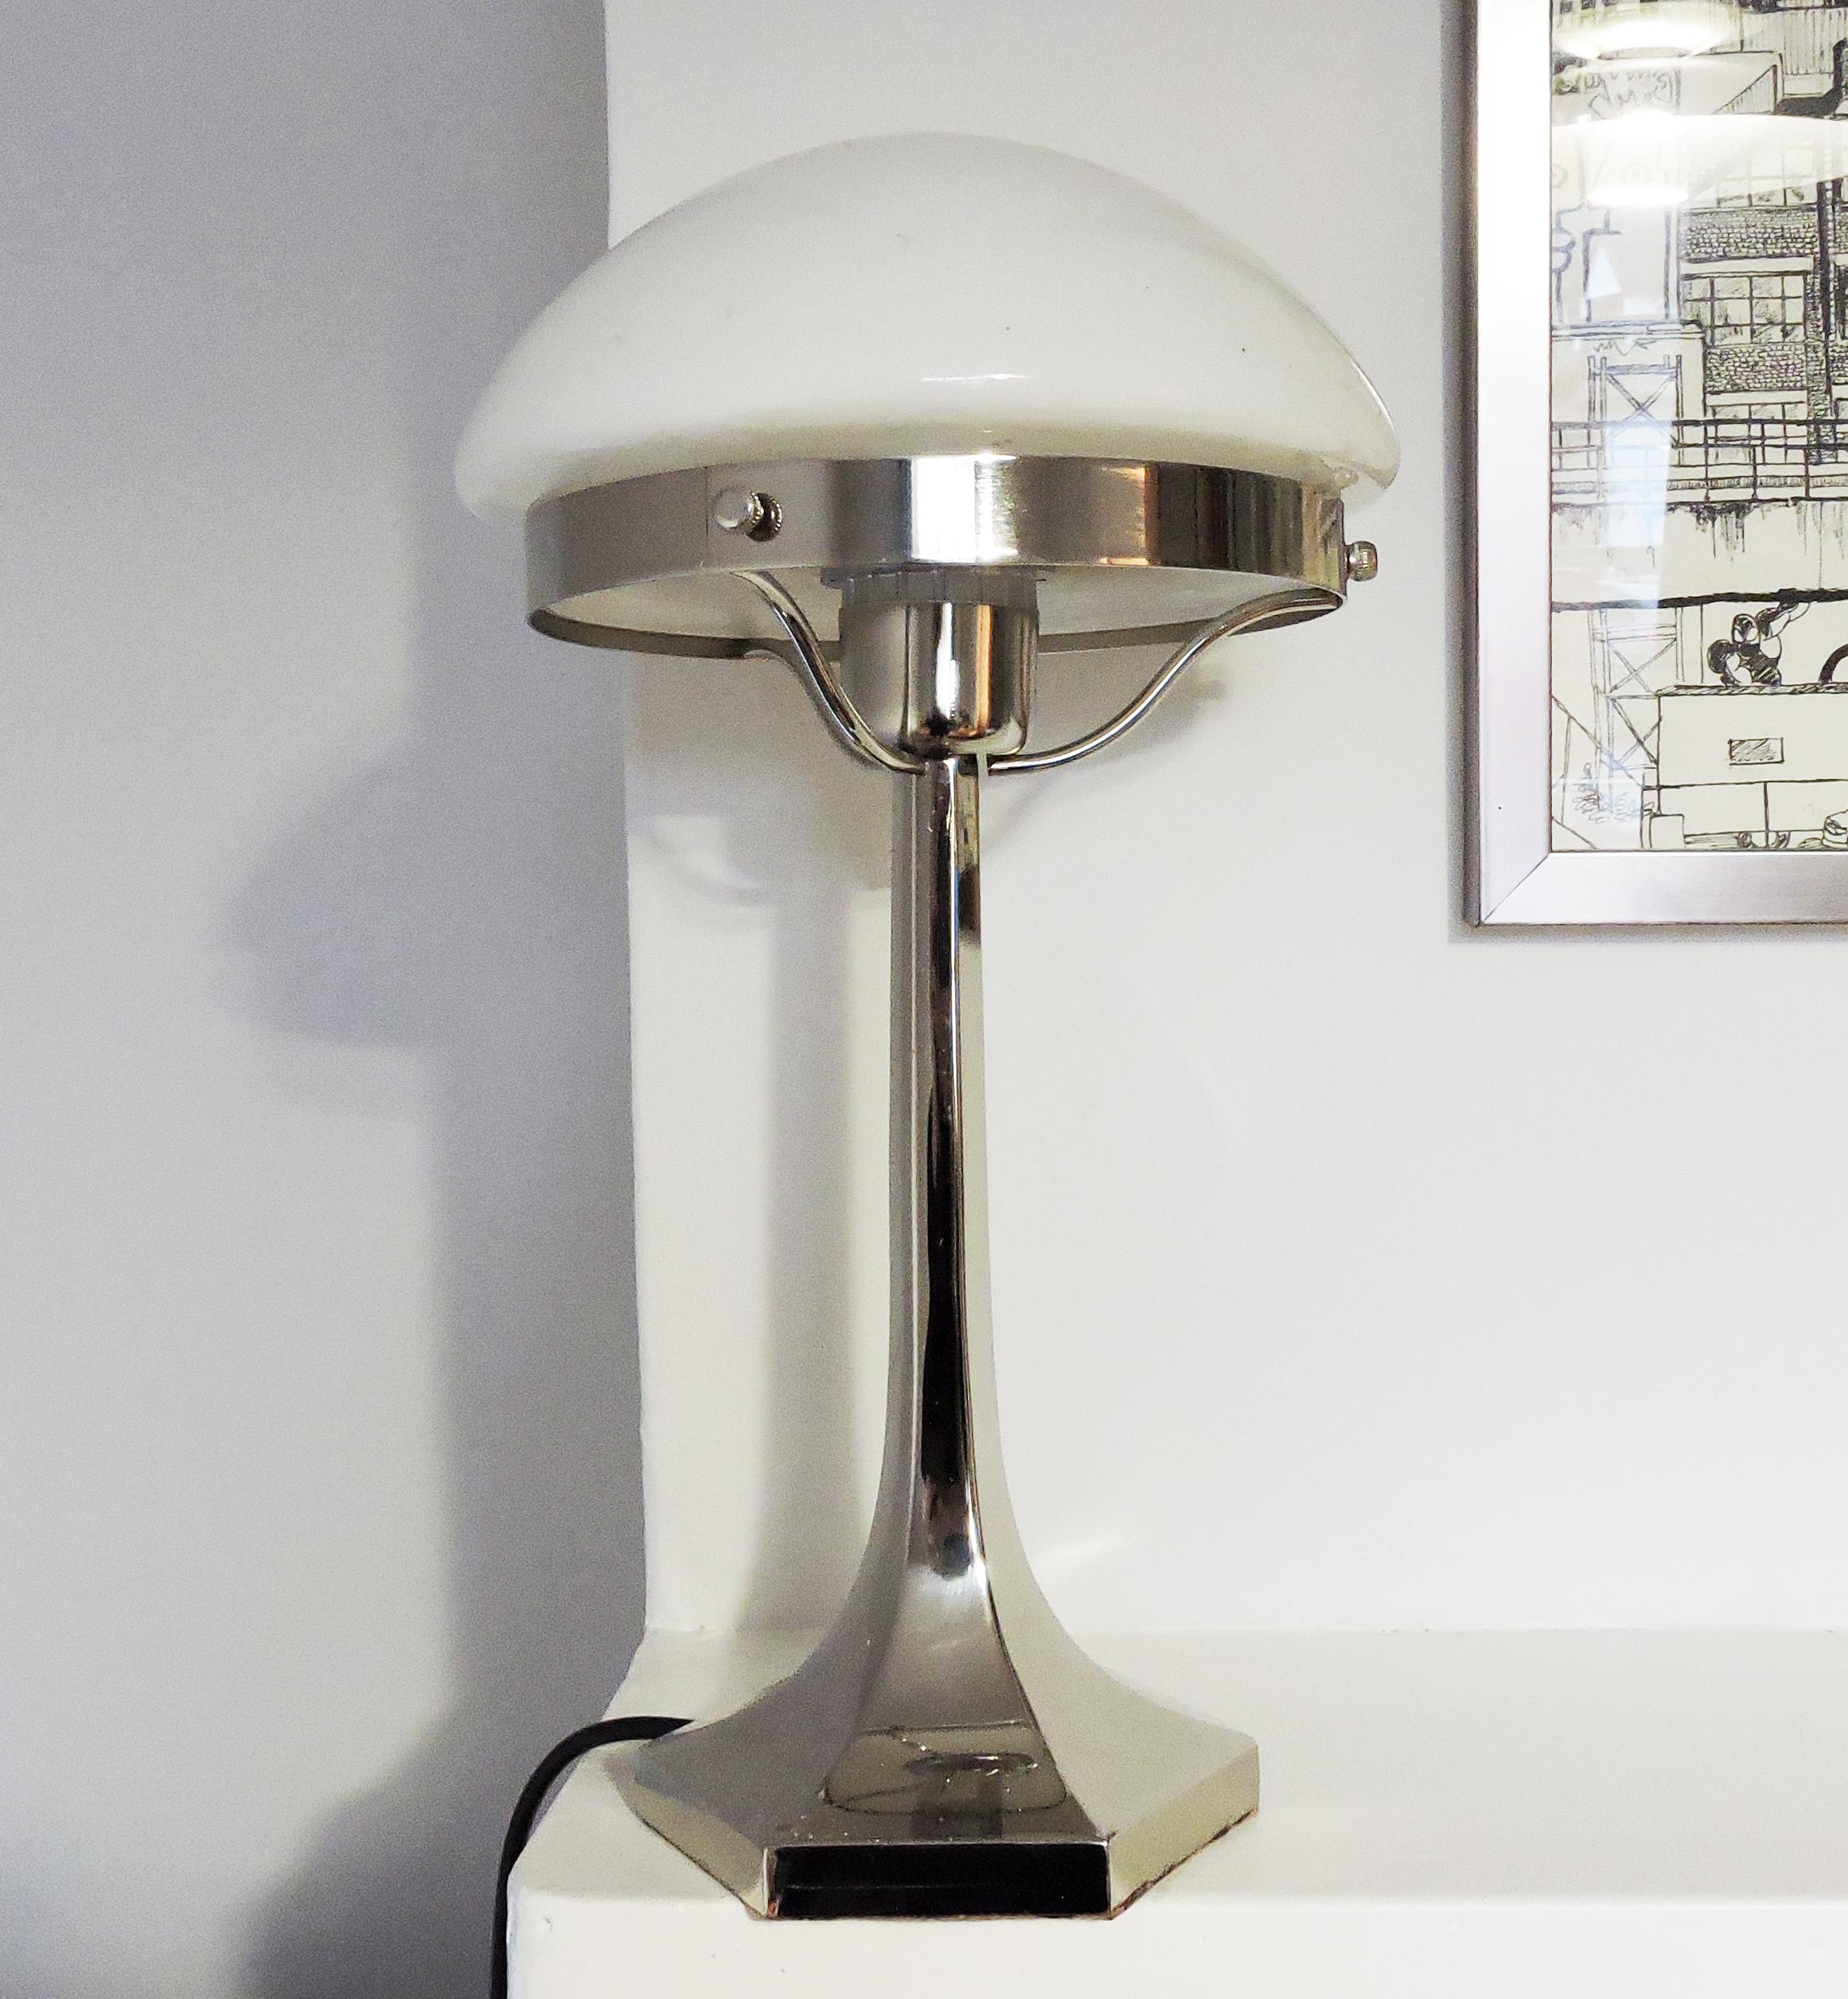 A 1920s Art Deco stainless steel table lamp from Lustrerie Deknudt.

A professional electrician has rewired this piece to be in working order.
Restoration and Damage Details - Rewired and/or new electrical components
Plug type - UK plug (up to